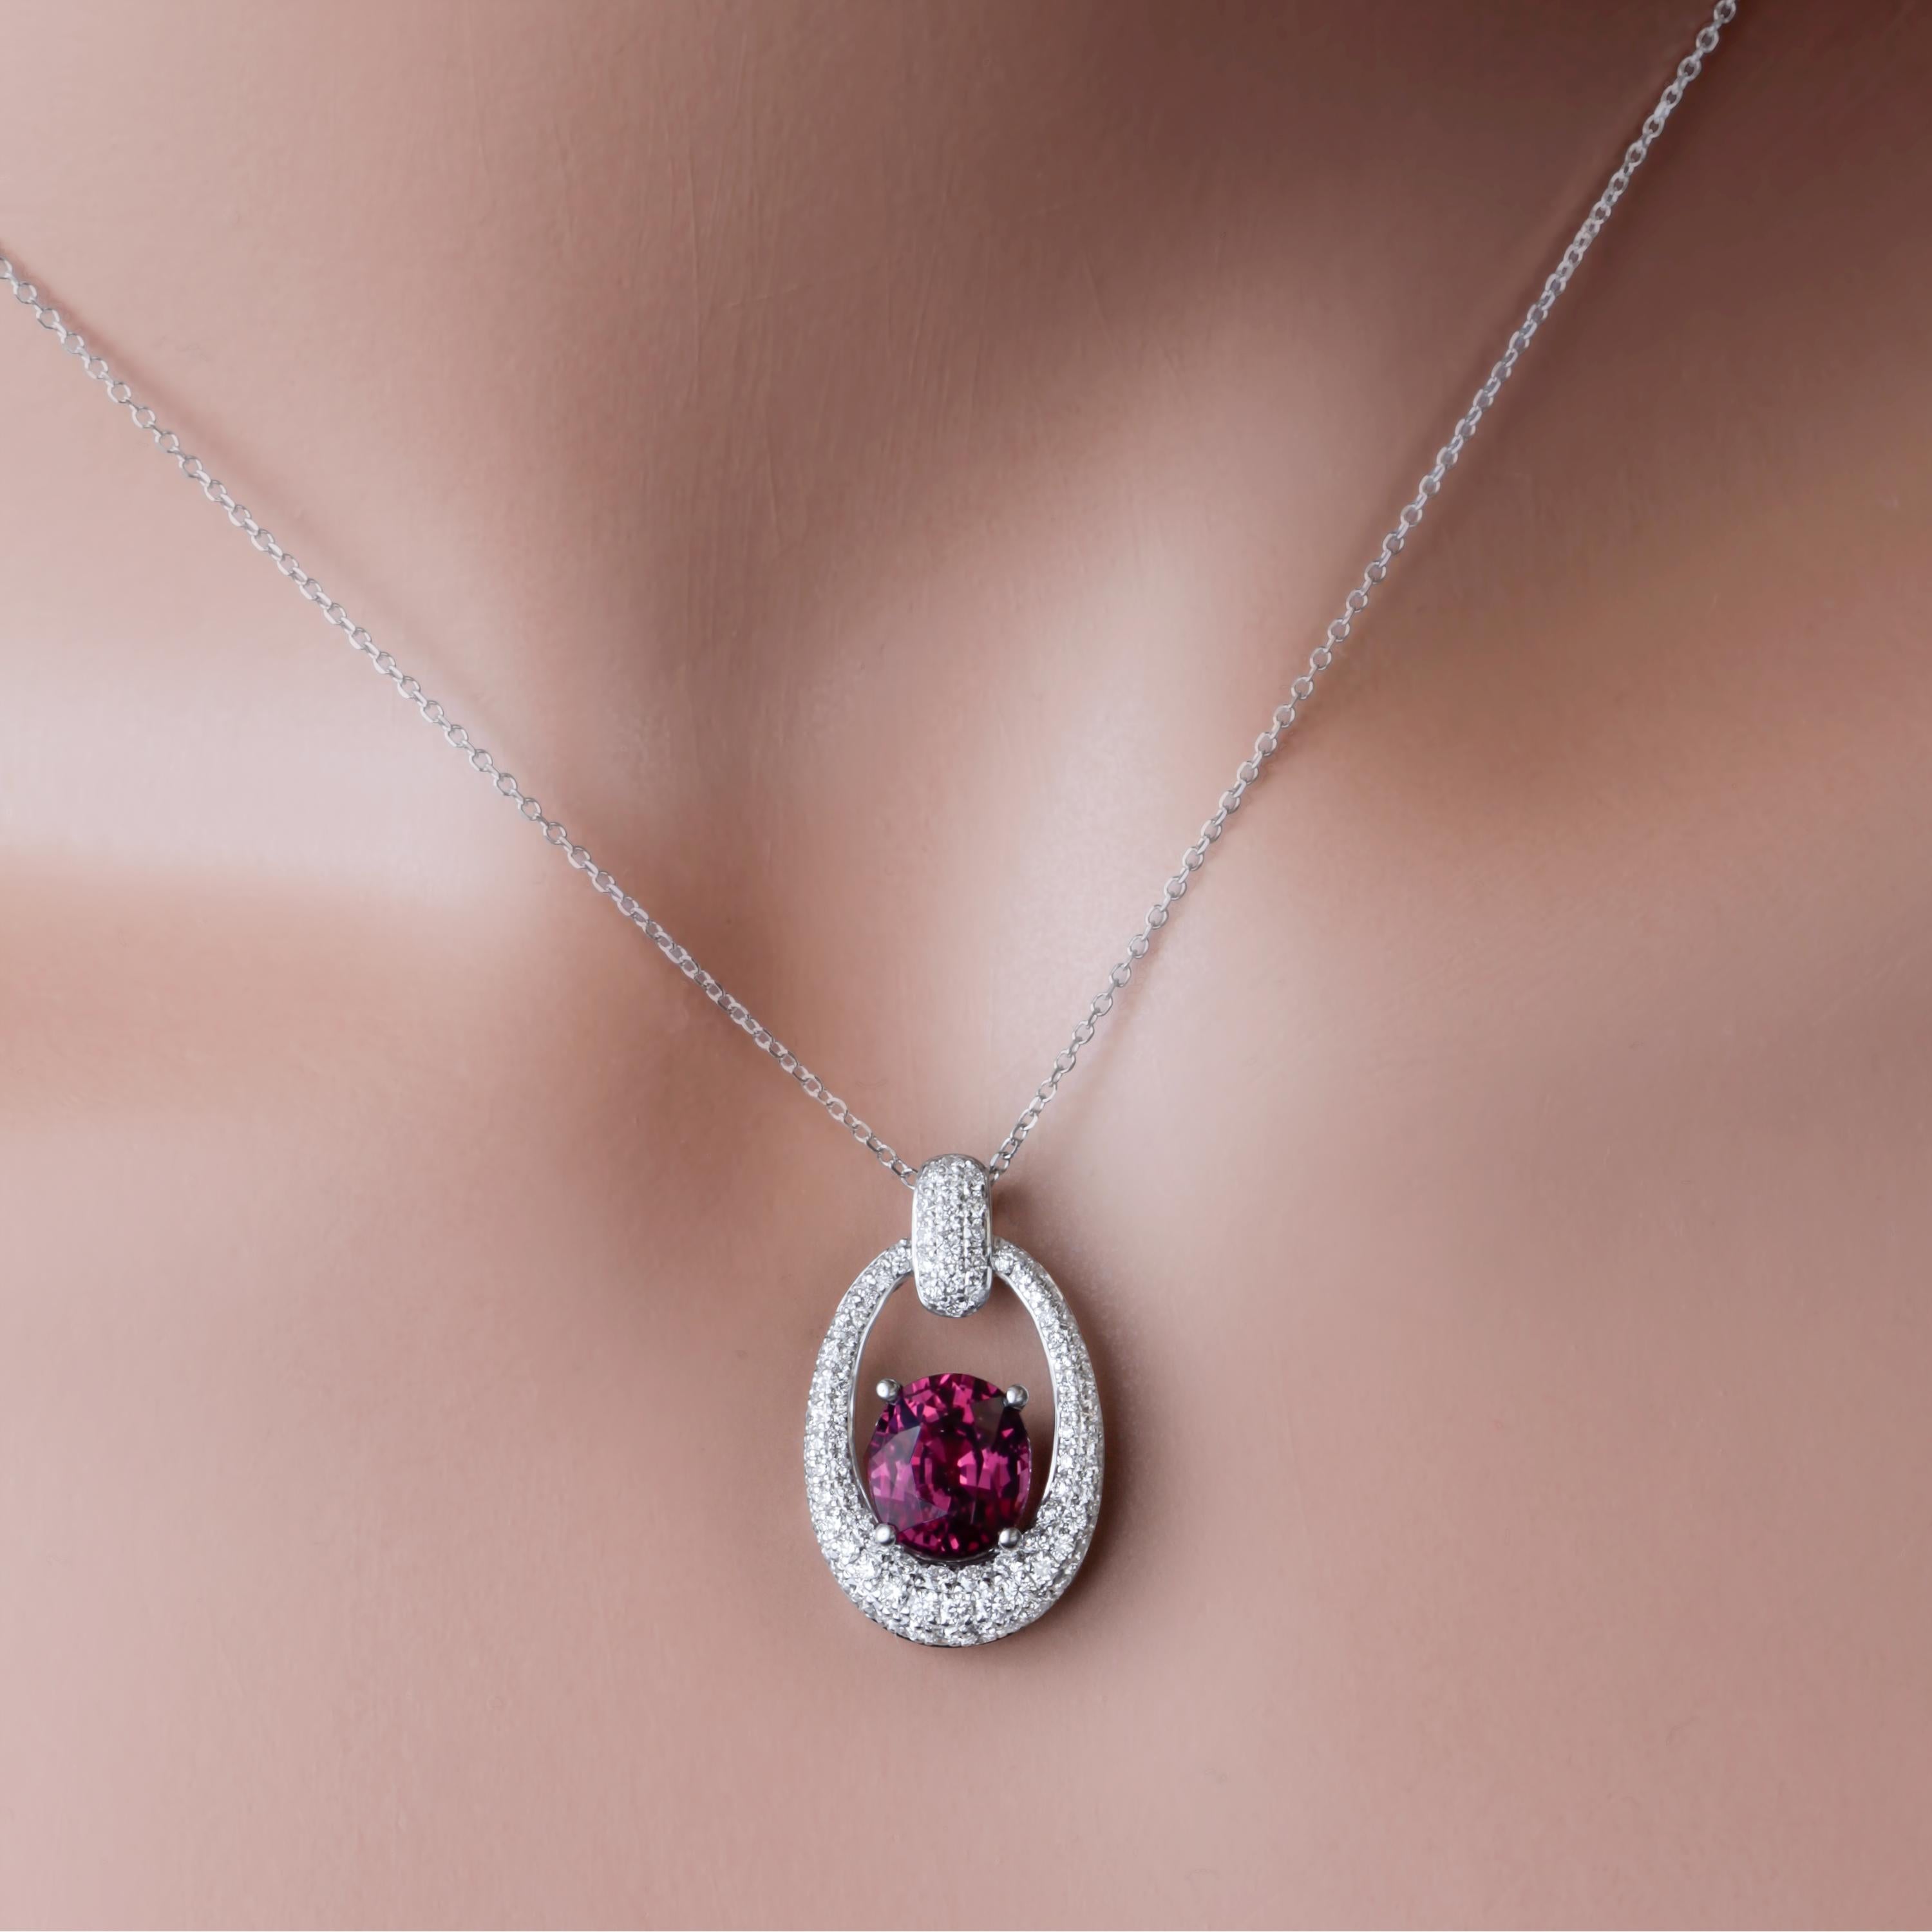 The epitome of elegance and luxury, our exquisite pendant that will steal your heart!

A 1.72 carat exotic garnet is perfectly cradled within a halo of shimmering round white diamonds. The sheer brilliance of this pendant is further accentuated by